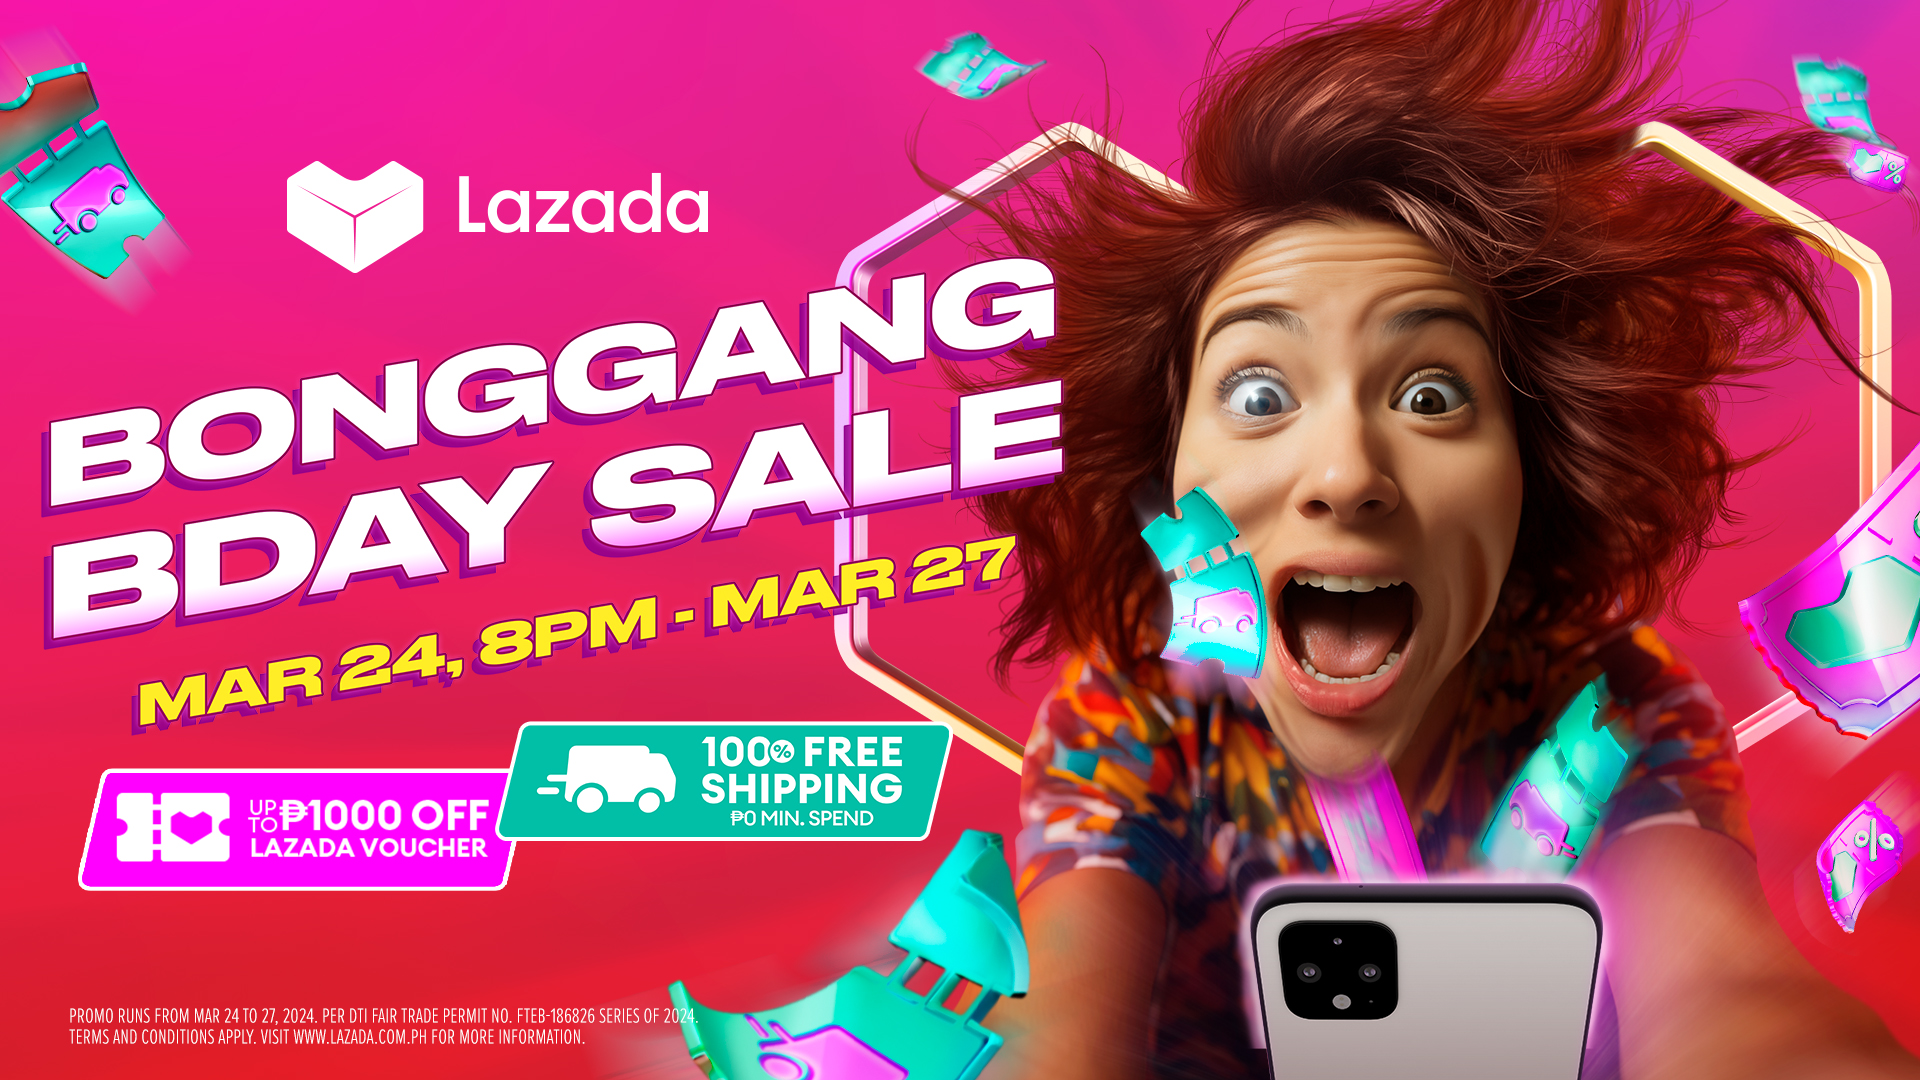 Lazada’s Bonggang Birthday Sale: Awesome Deals, Vouchers, and Free Shipping!